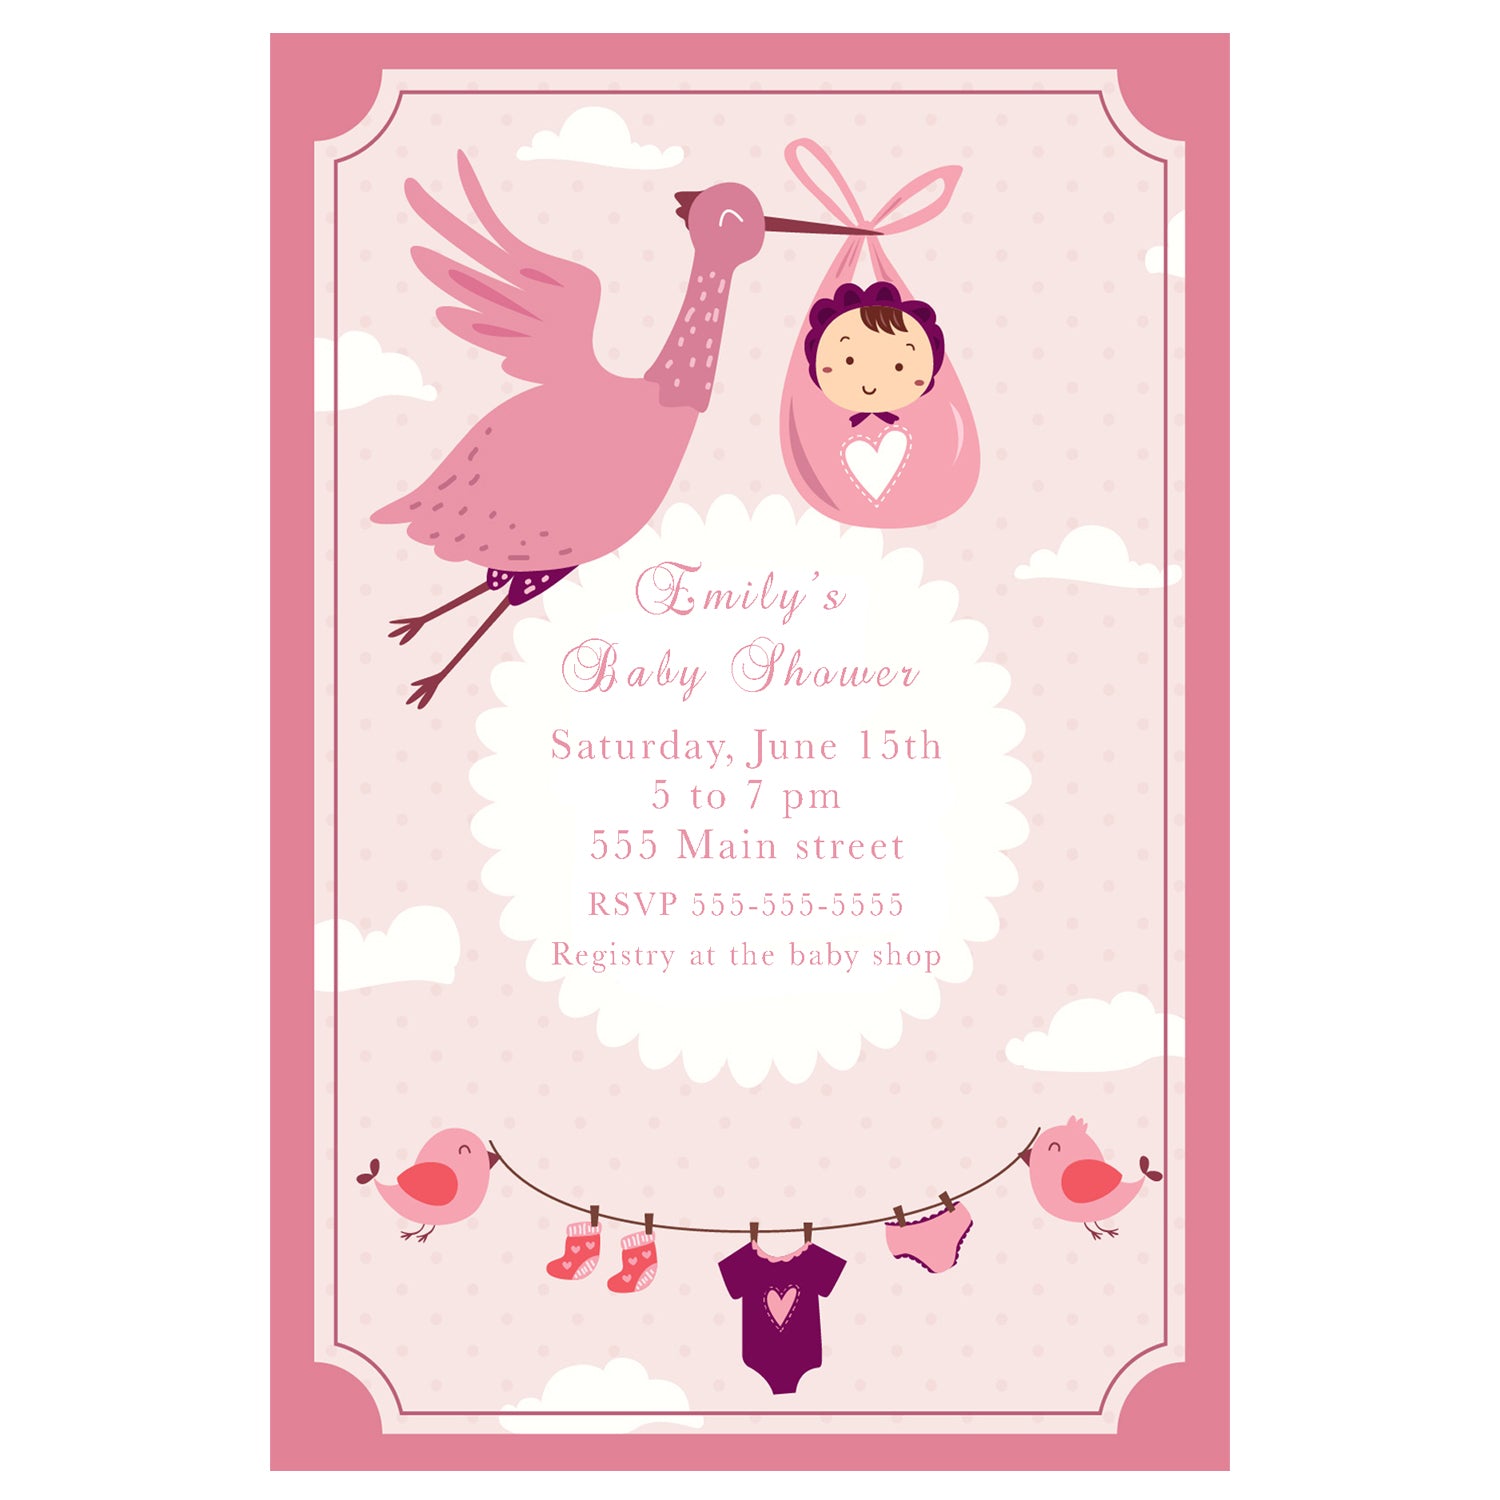 30 Stork pink invitations girl baby shower personalized